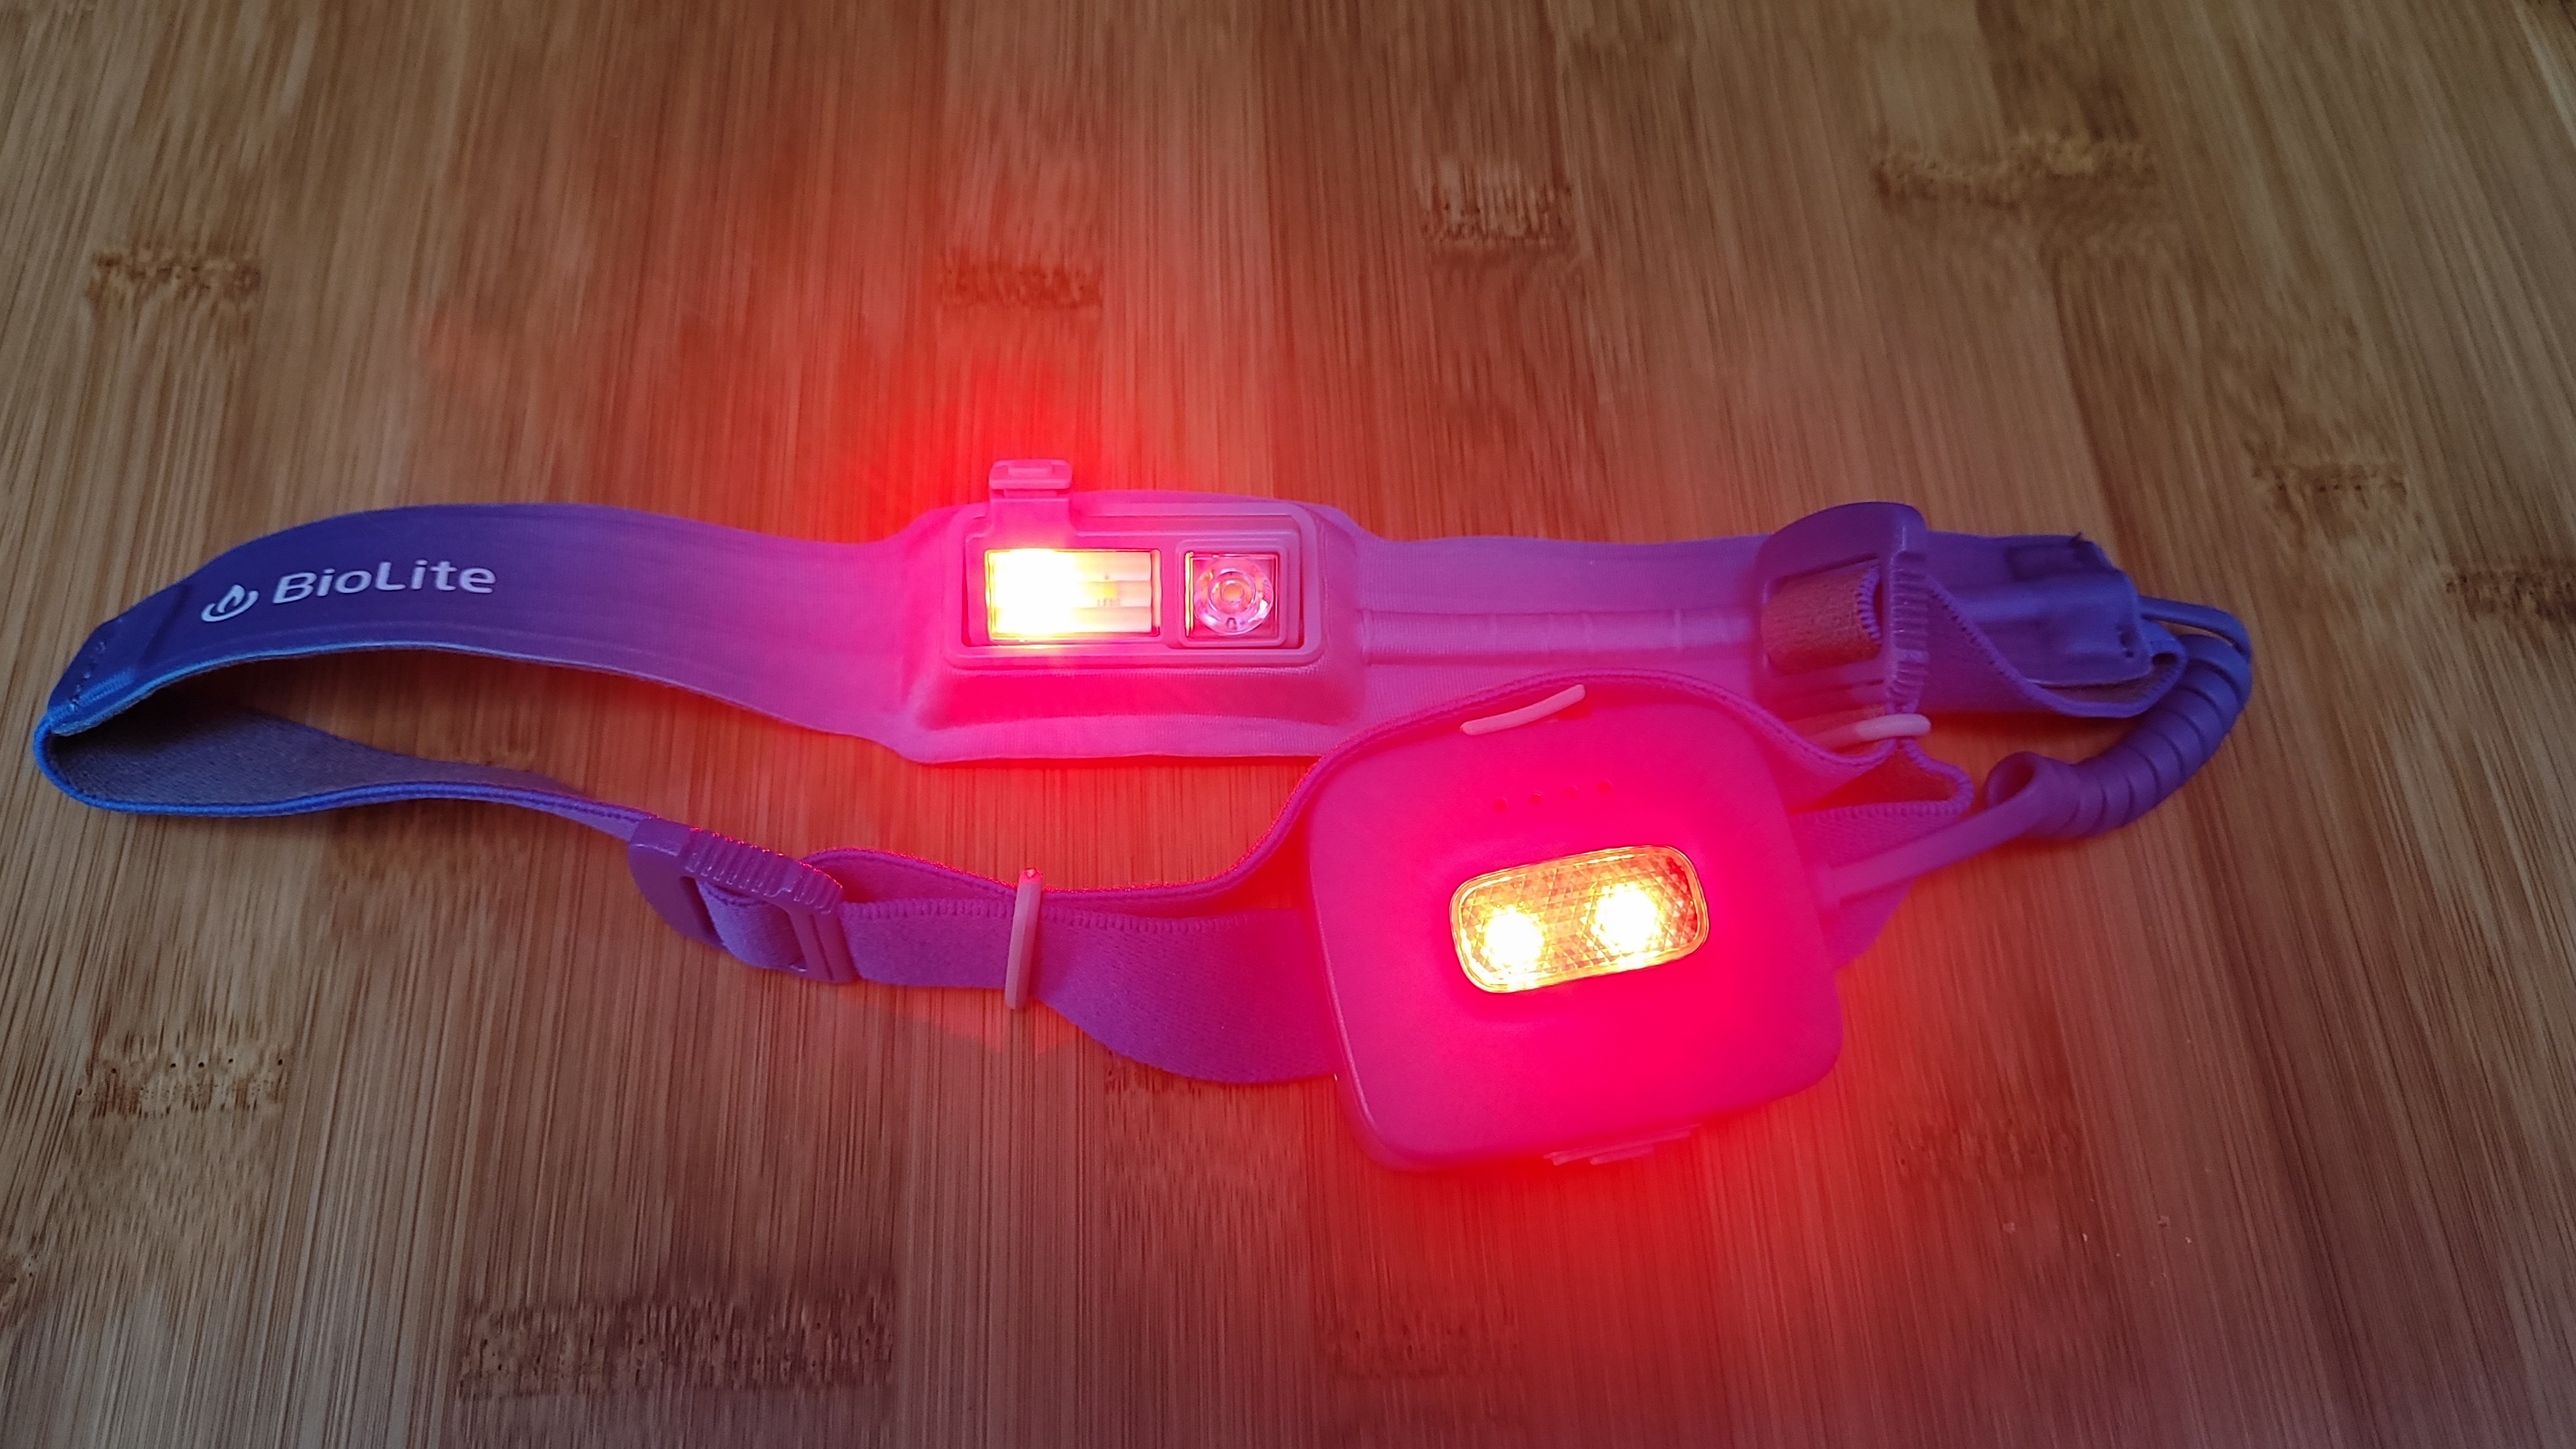 The 425 headlamp shining red from both front and rear lights simultaneously